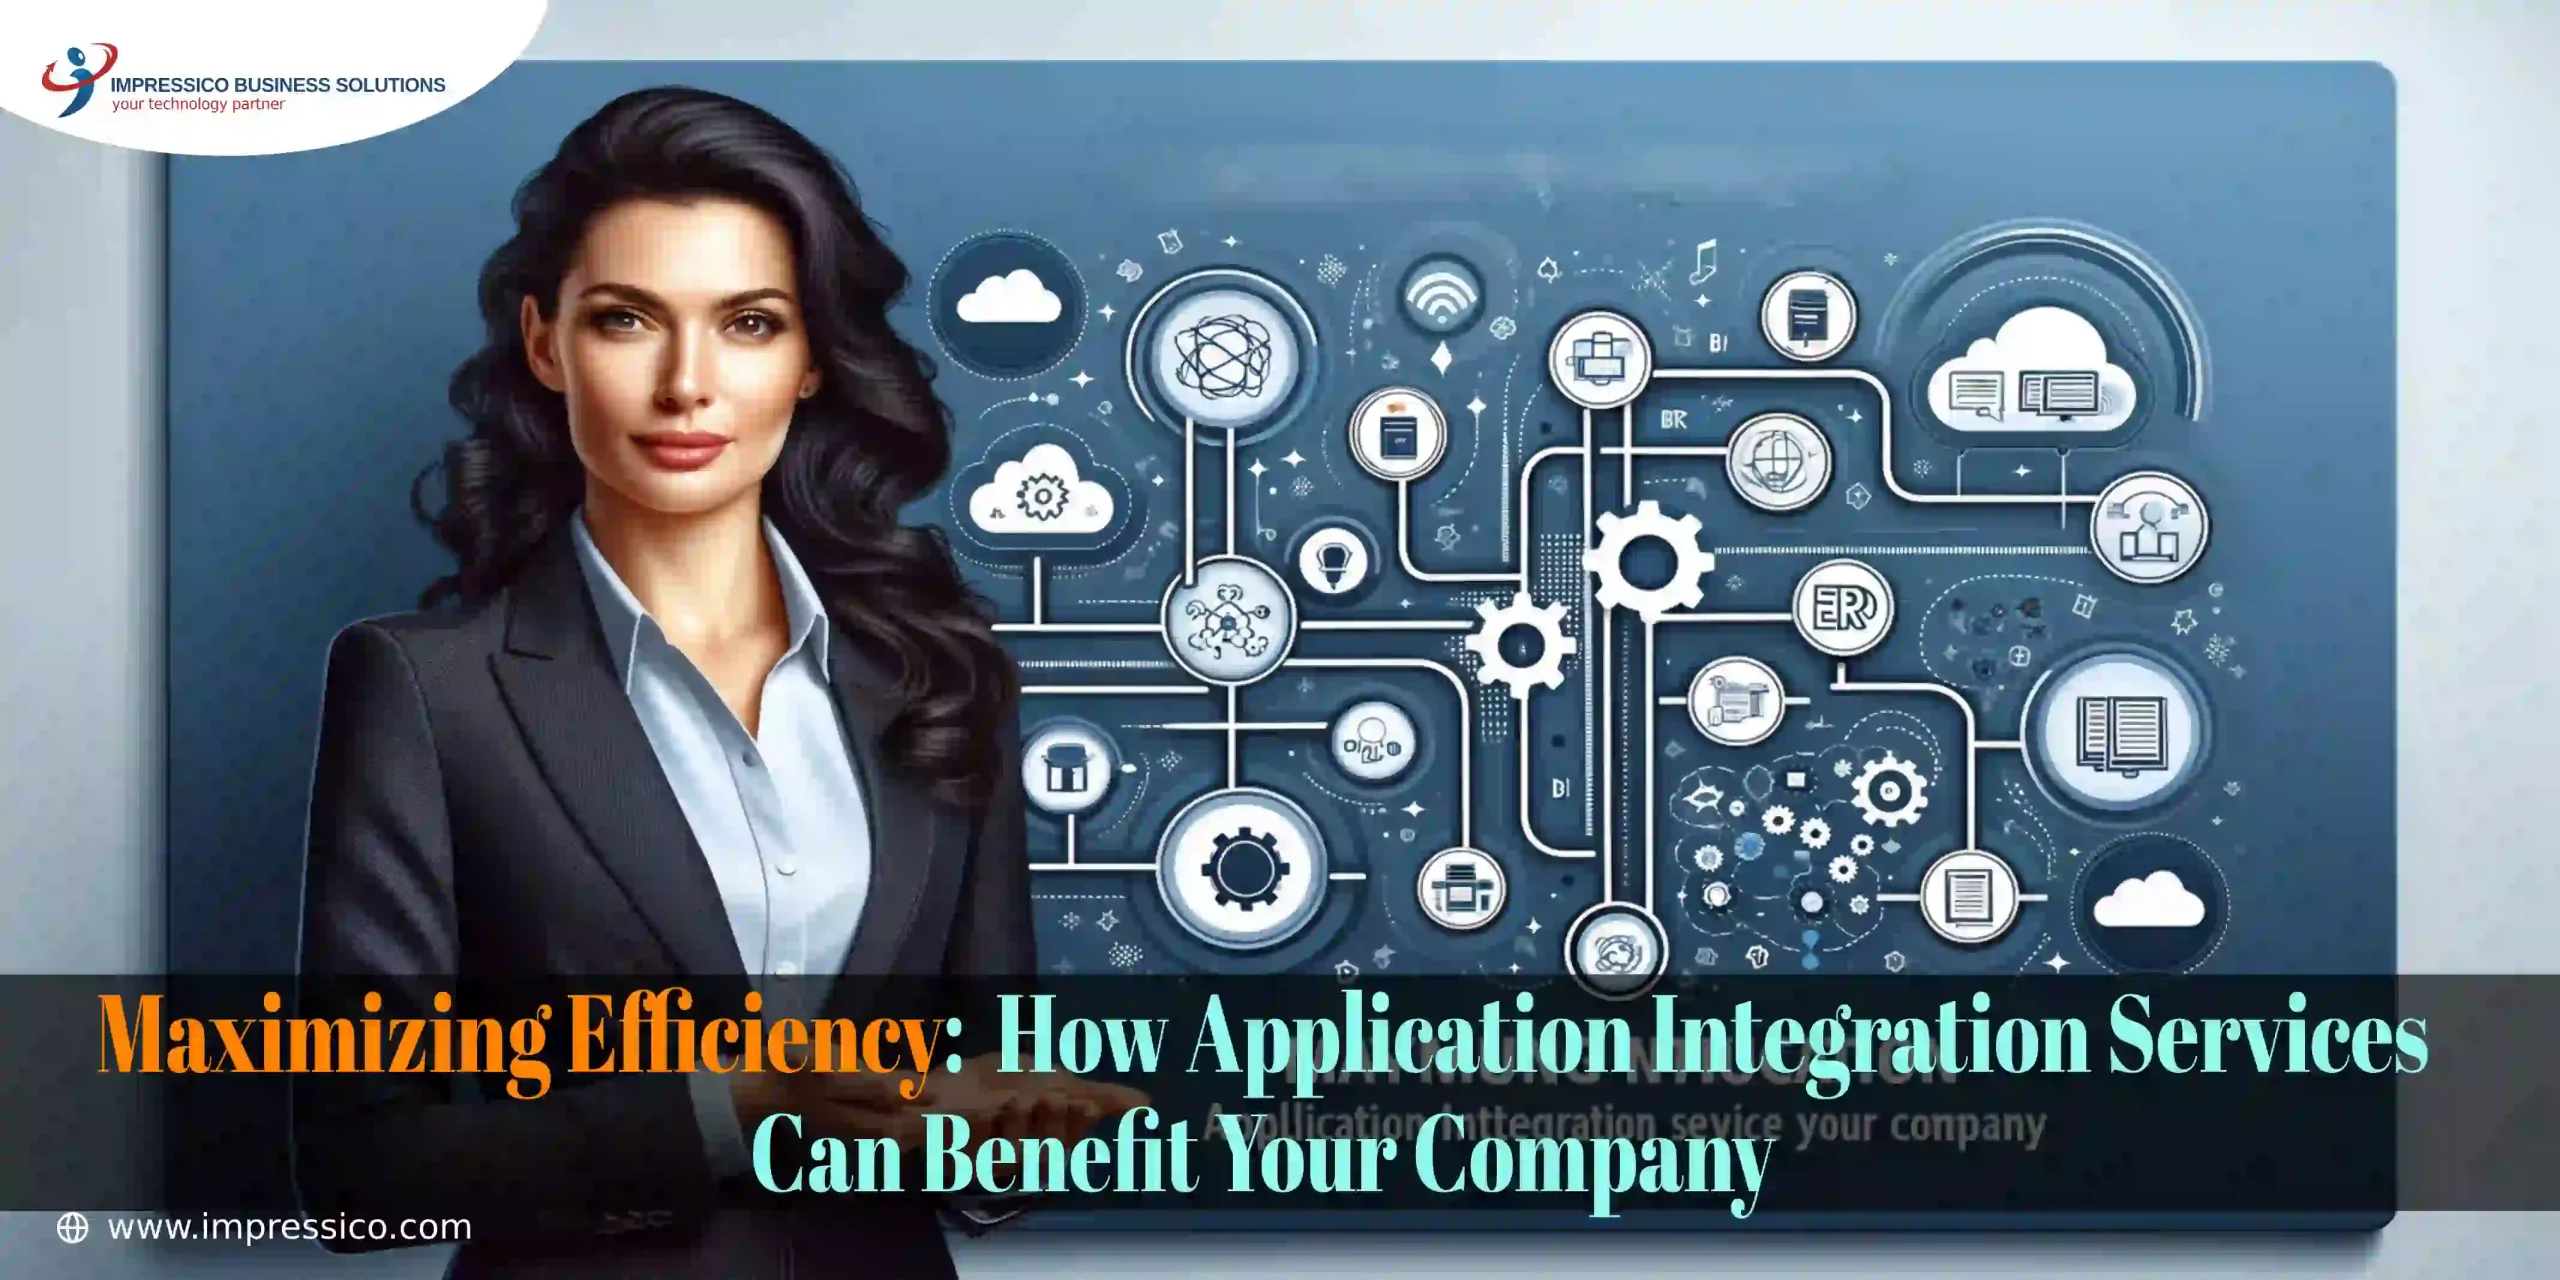 How Application Integration Can Benefit Your Company